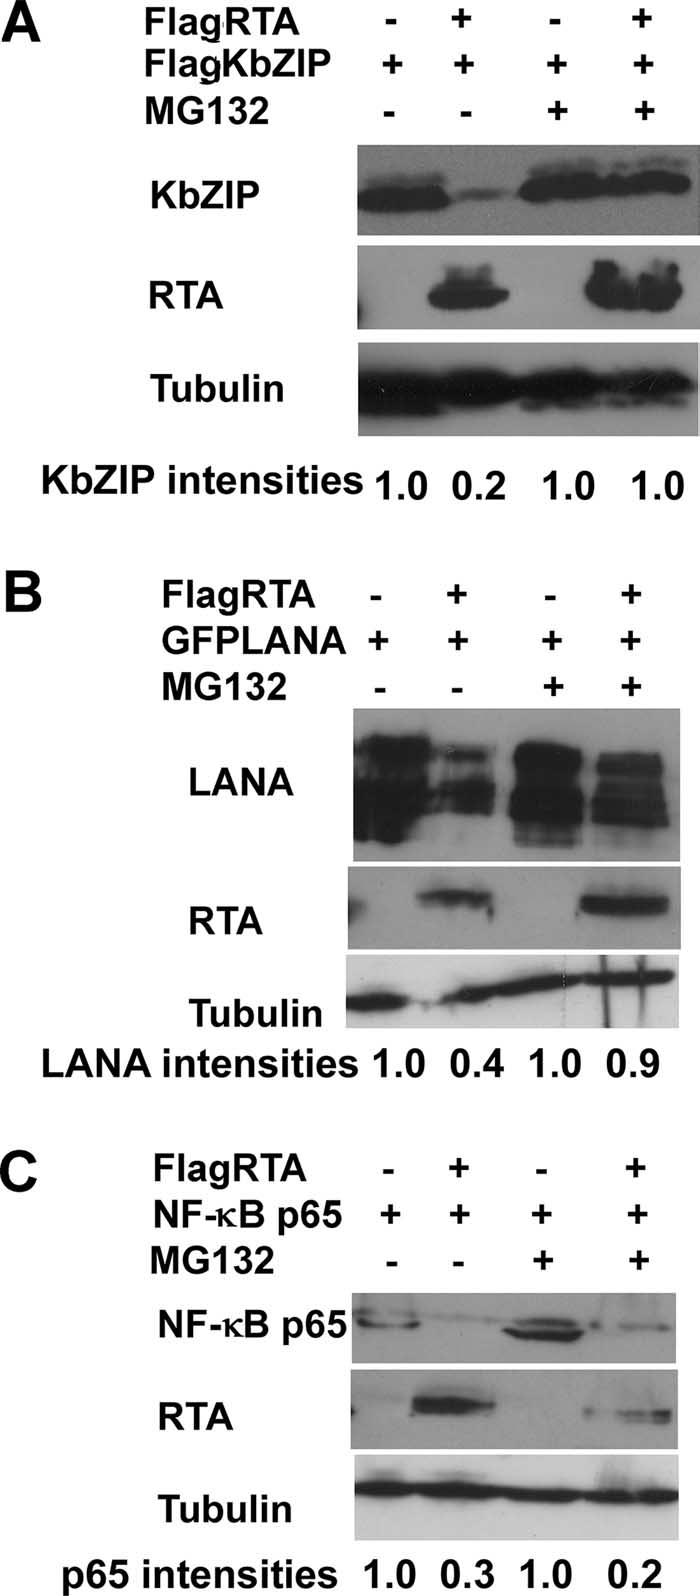 VOL. 82, 2008 KSHV RTA DEGRADES REPRESSORS 3599 lytic genes. The results showed that the mrna levels of KbZIP and K8.1 were lower in the presence of proteasome inhibitor (Fig.